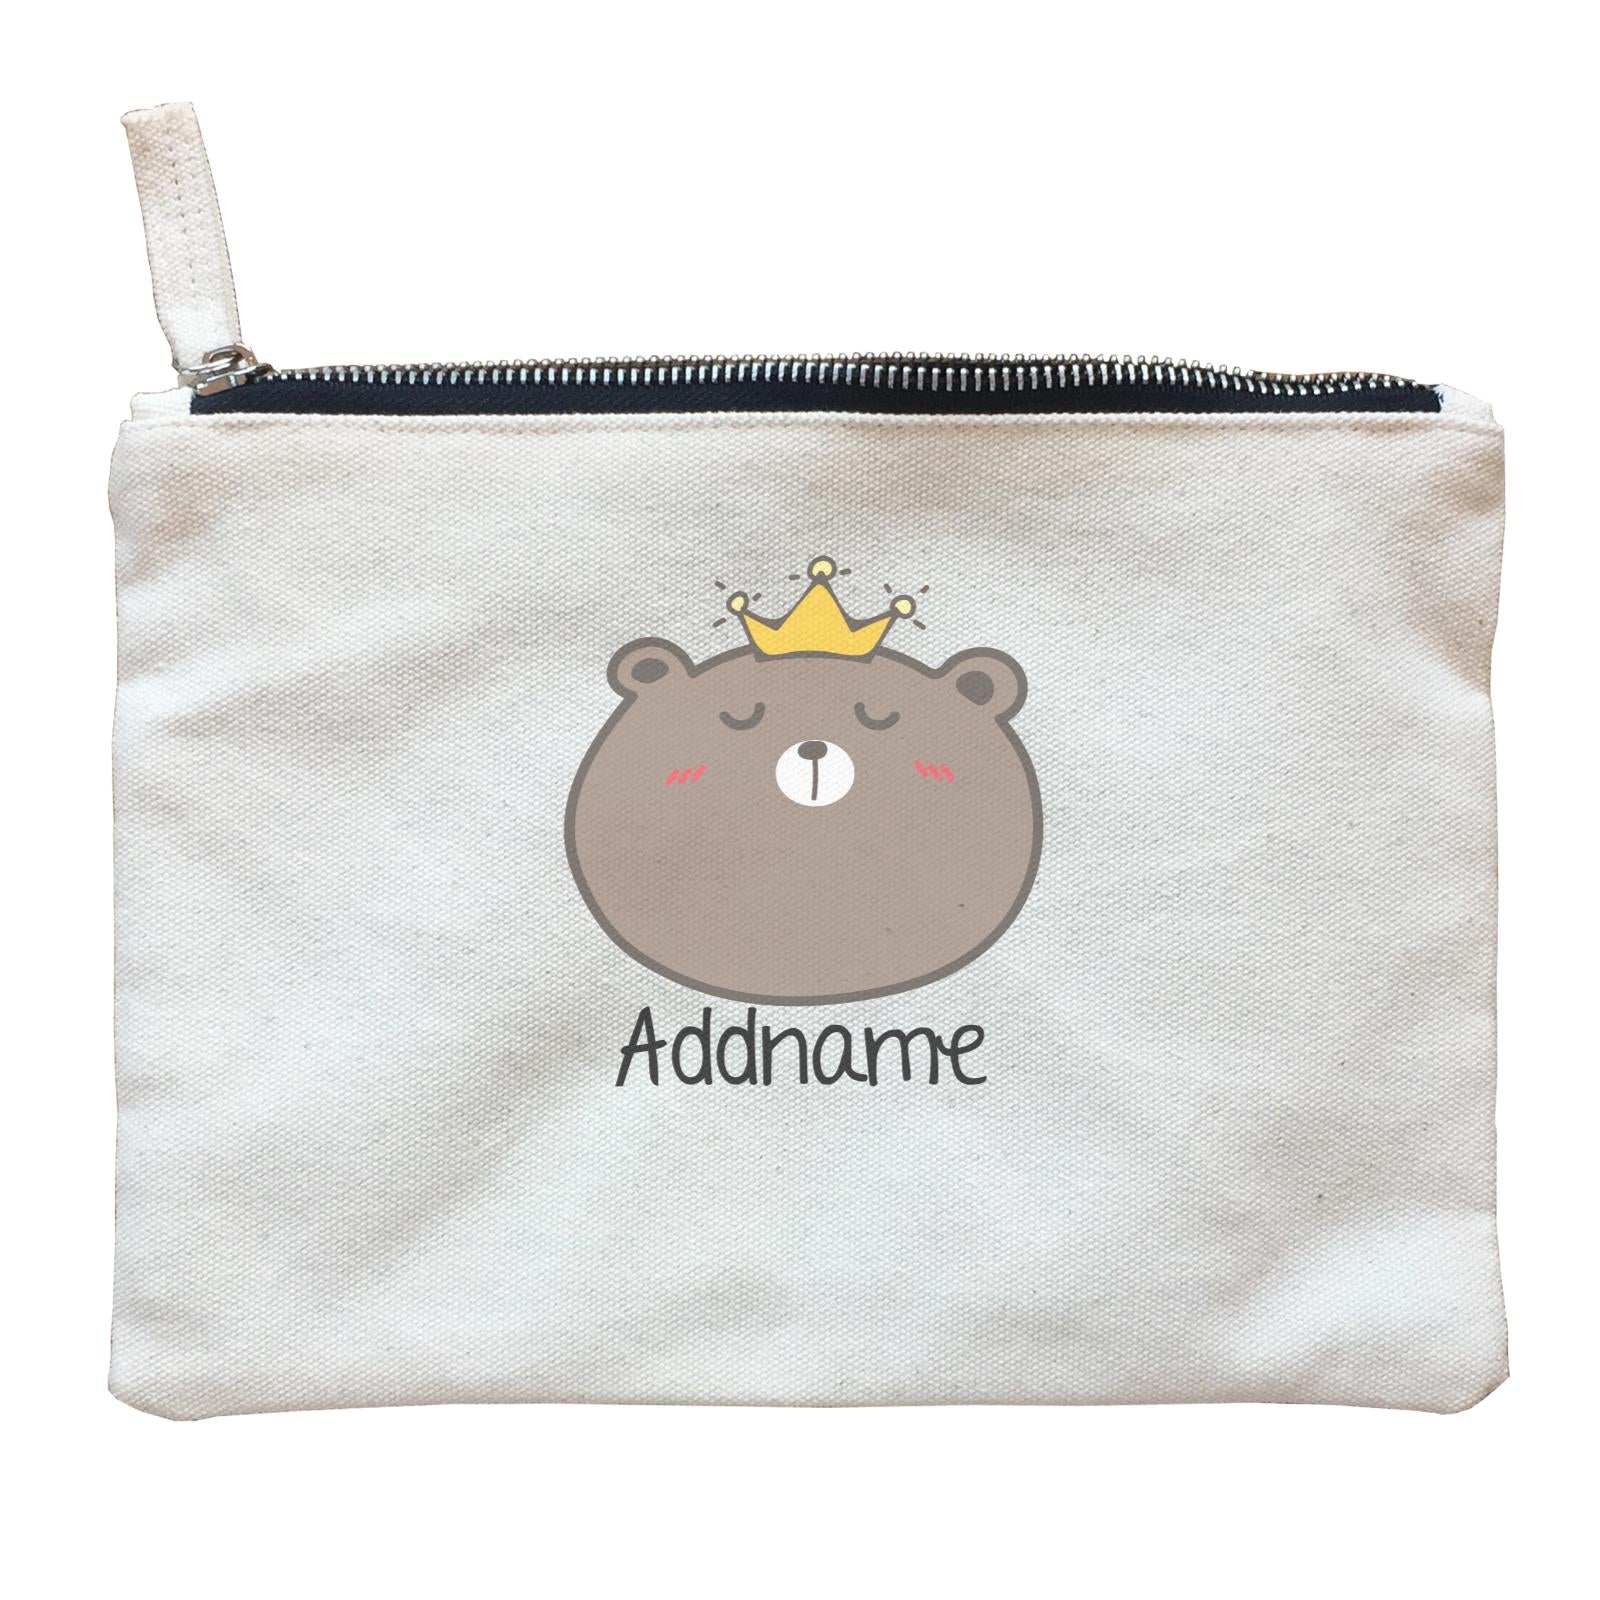 Cute Animals And Friends Series Cute Brown Bear With Crown Addname Zipper Pouch